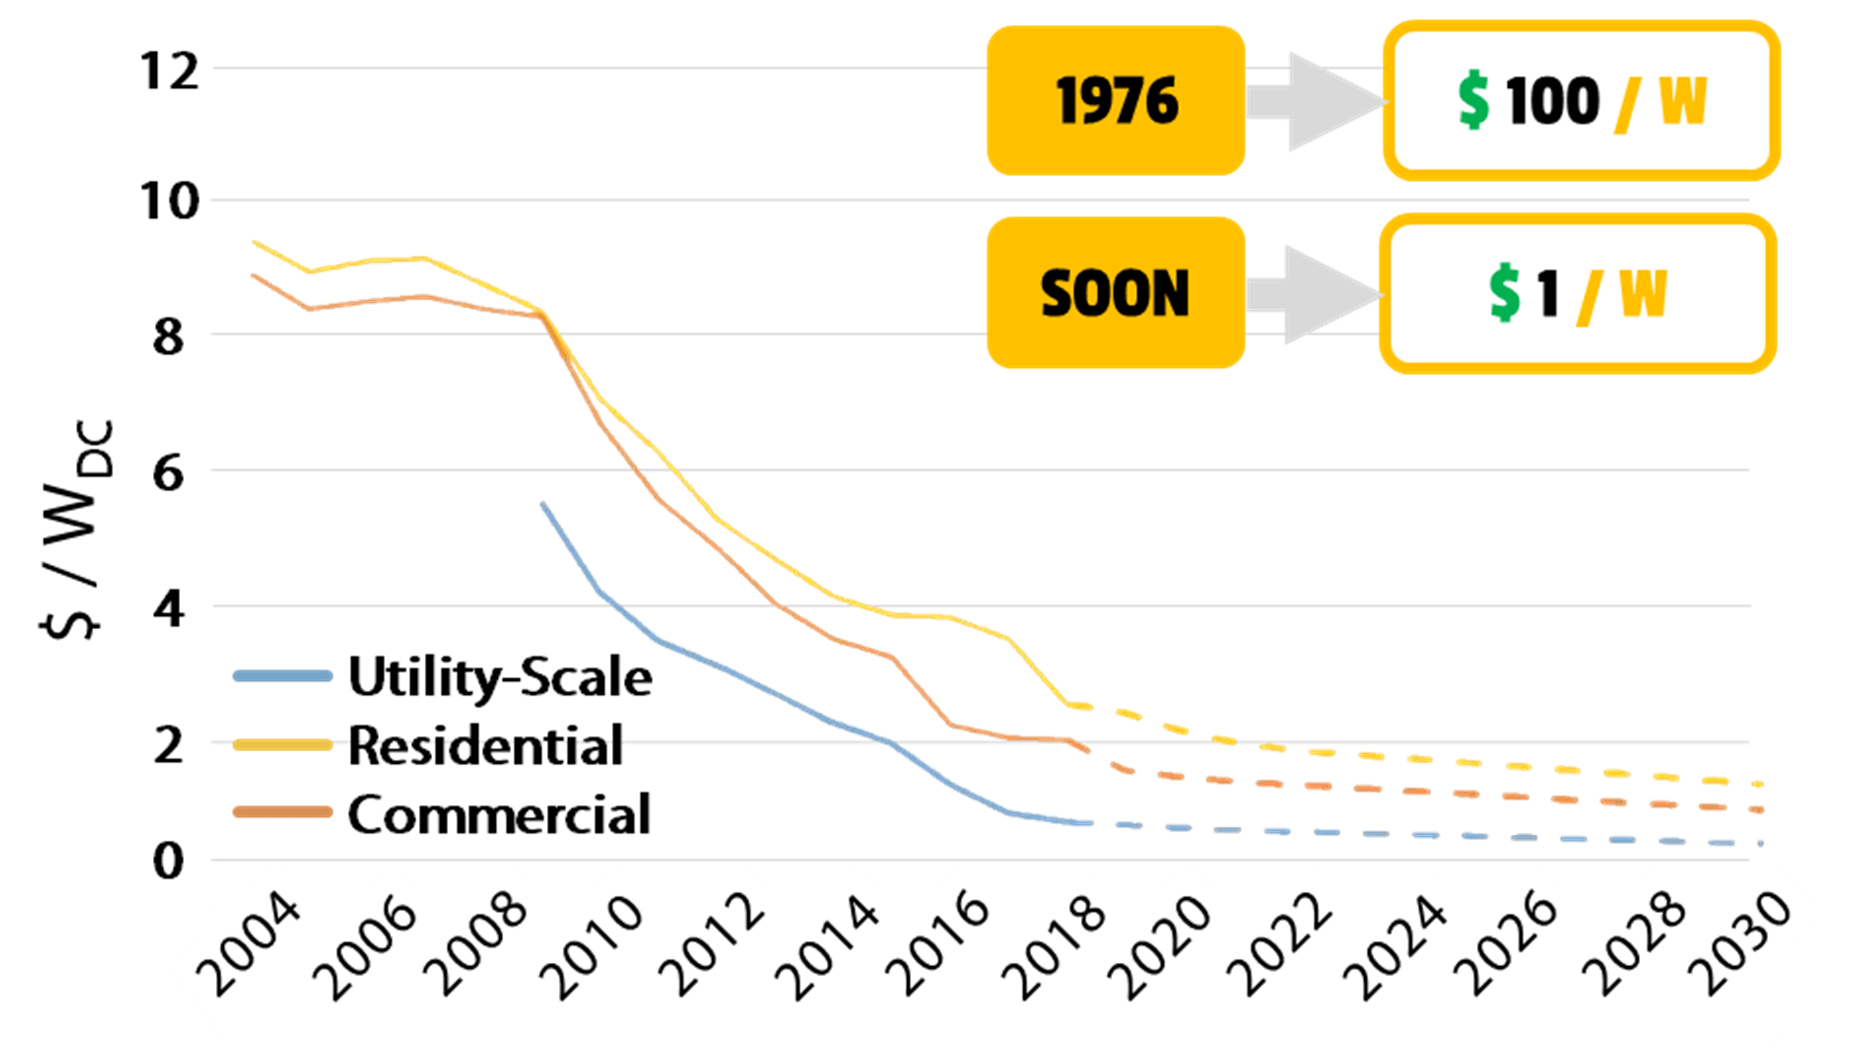 US Solar Installed Costs 2004-2030E